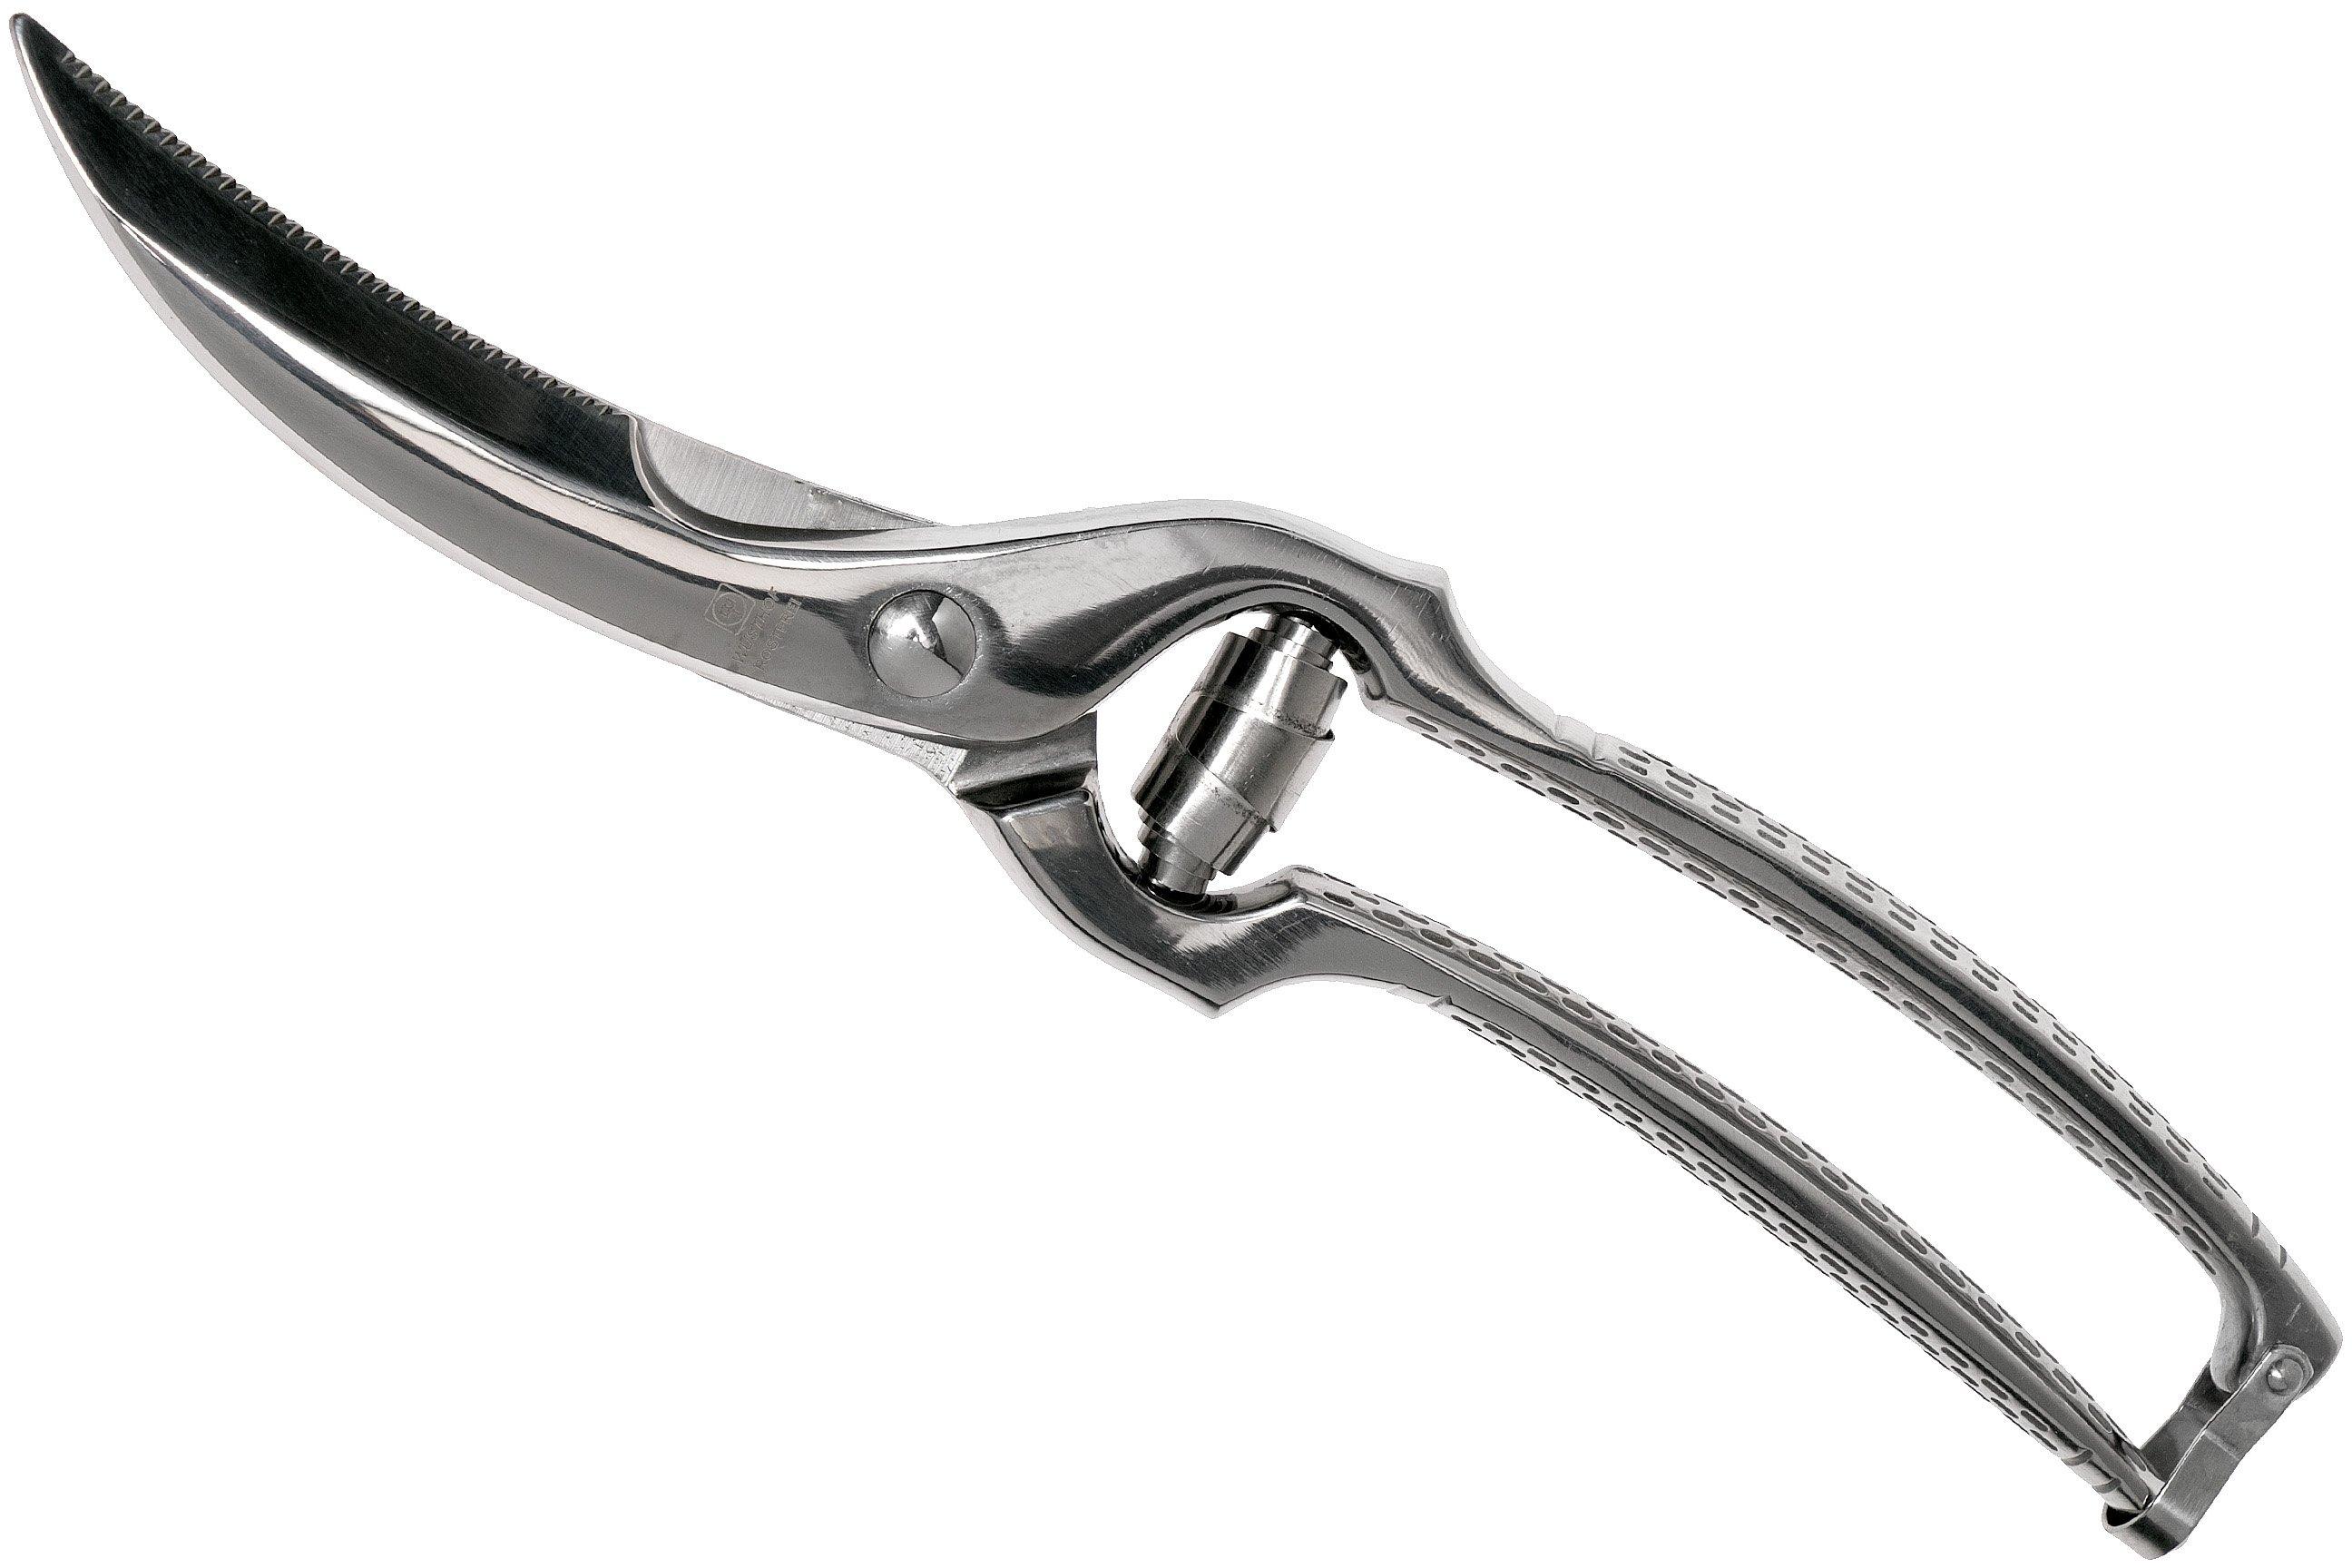 Wusthof Poultry Shears – the international pantry